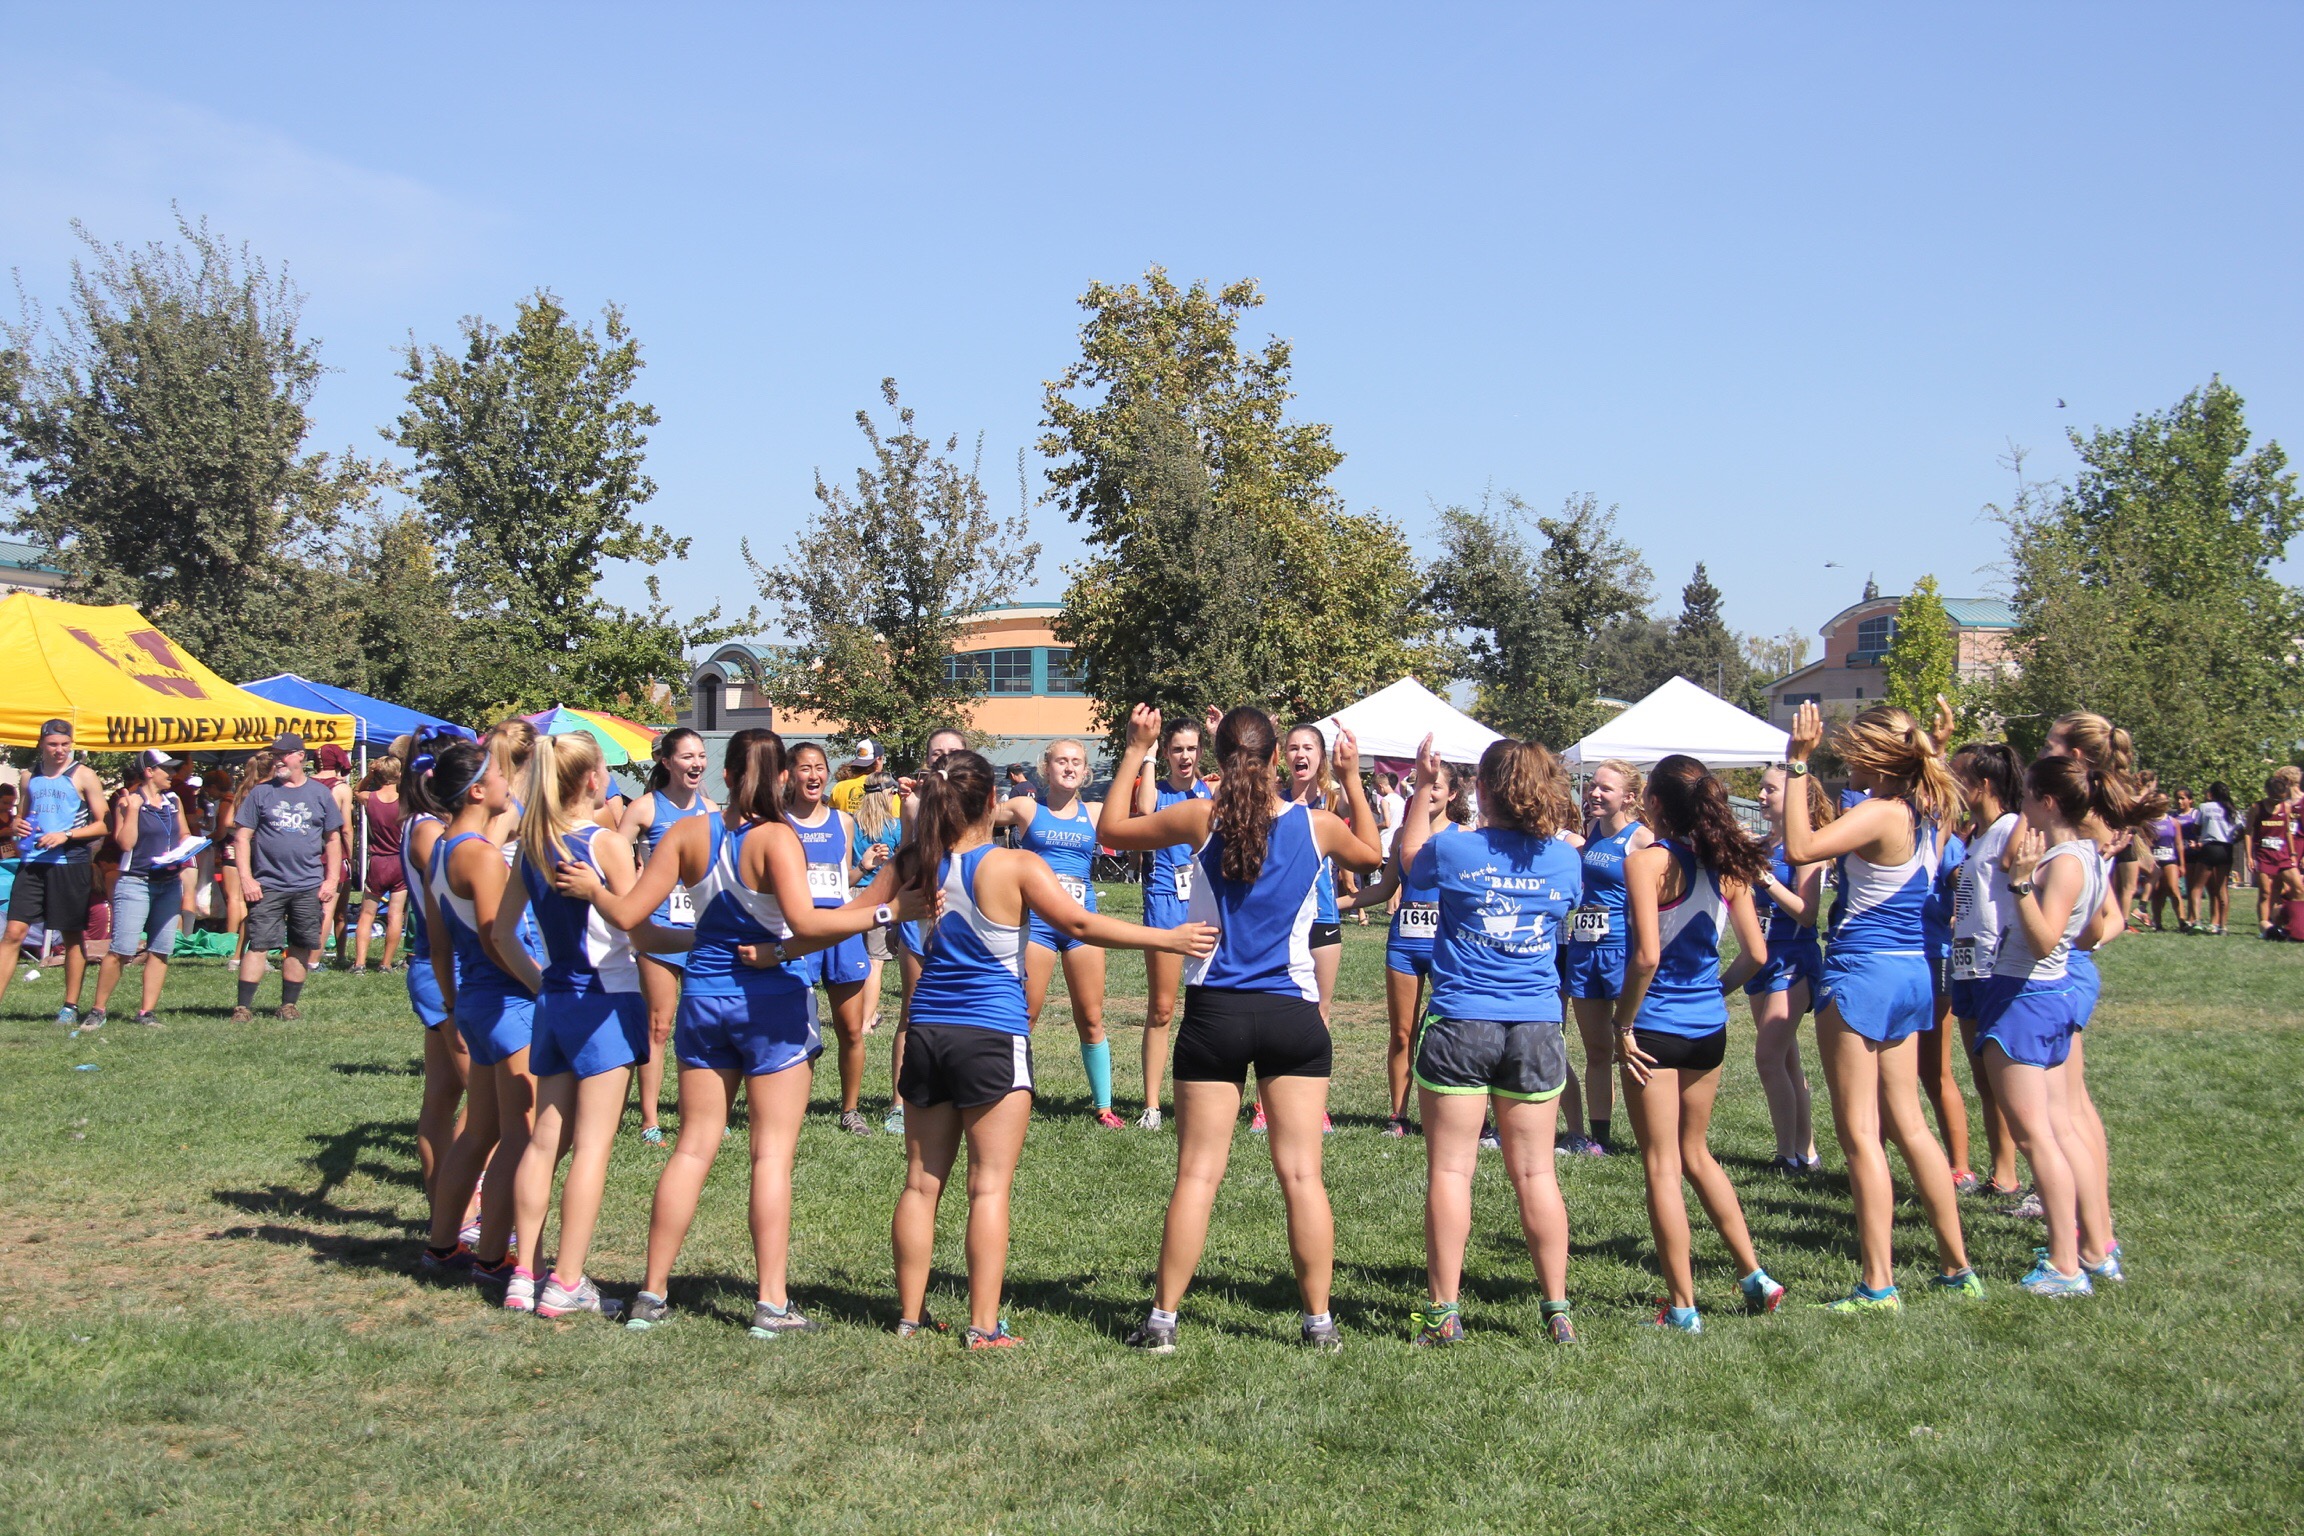 JV women prepare for their race with a cheer. Women's JV earned a perfect score of 15.